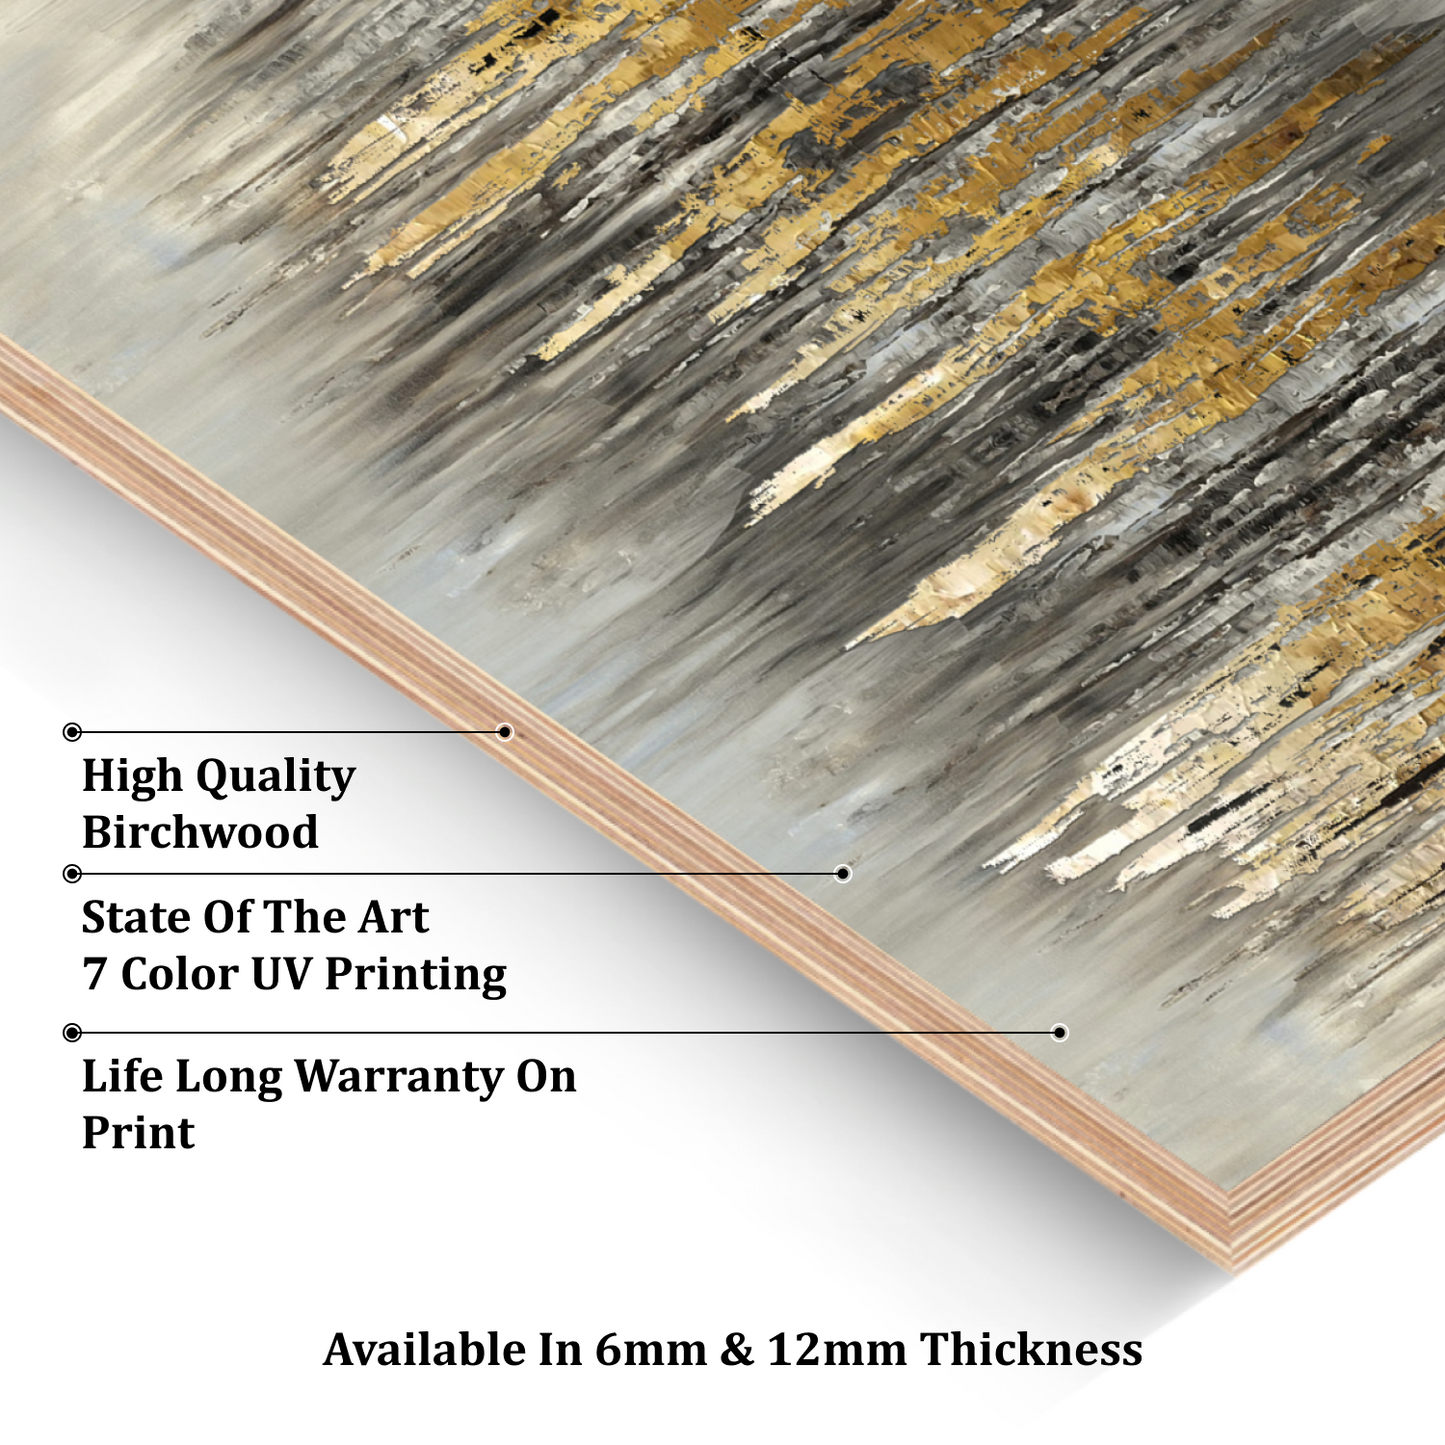 Gold Artistic Luxury Wall Art Painting